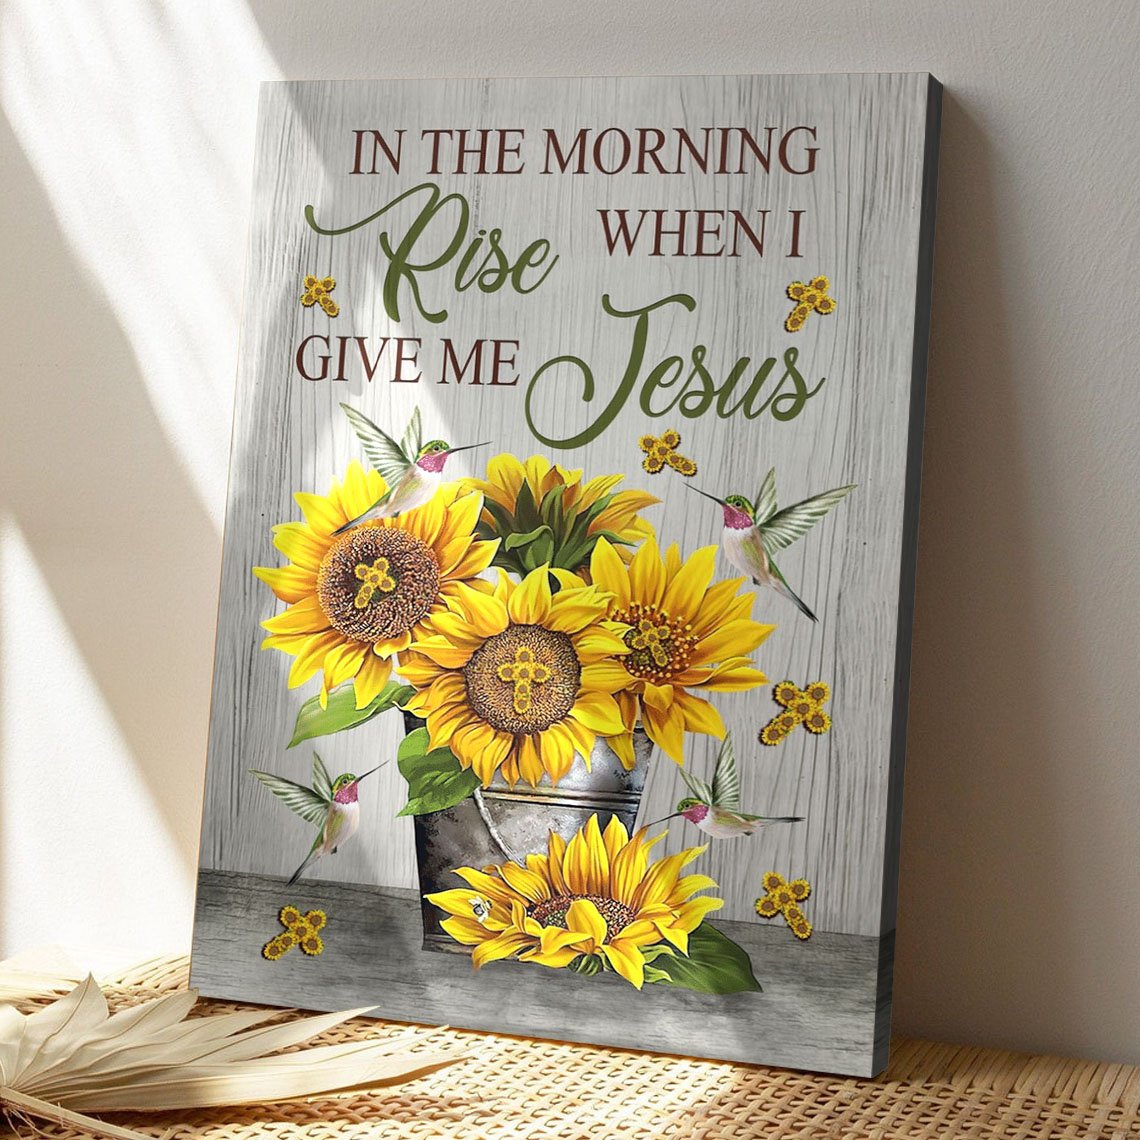 Christian Canvas Wall Art - God Canvas - In The Morning When I Rise Give Me Jesus Canvas - Bible Verse Canvas - Ciaocustom